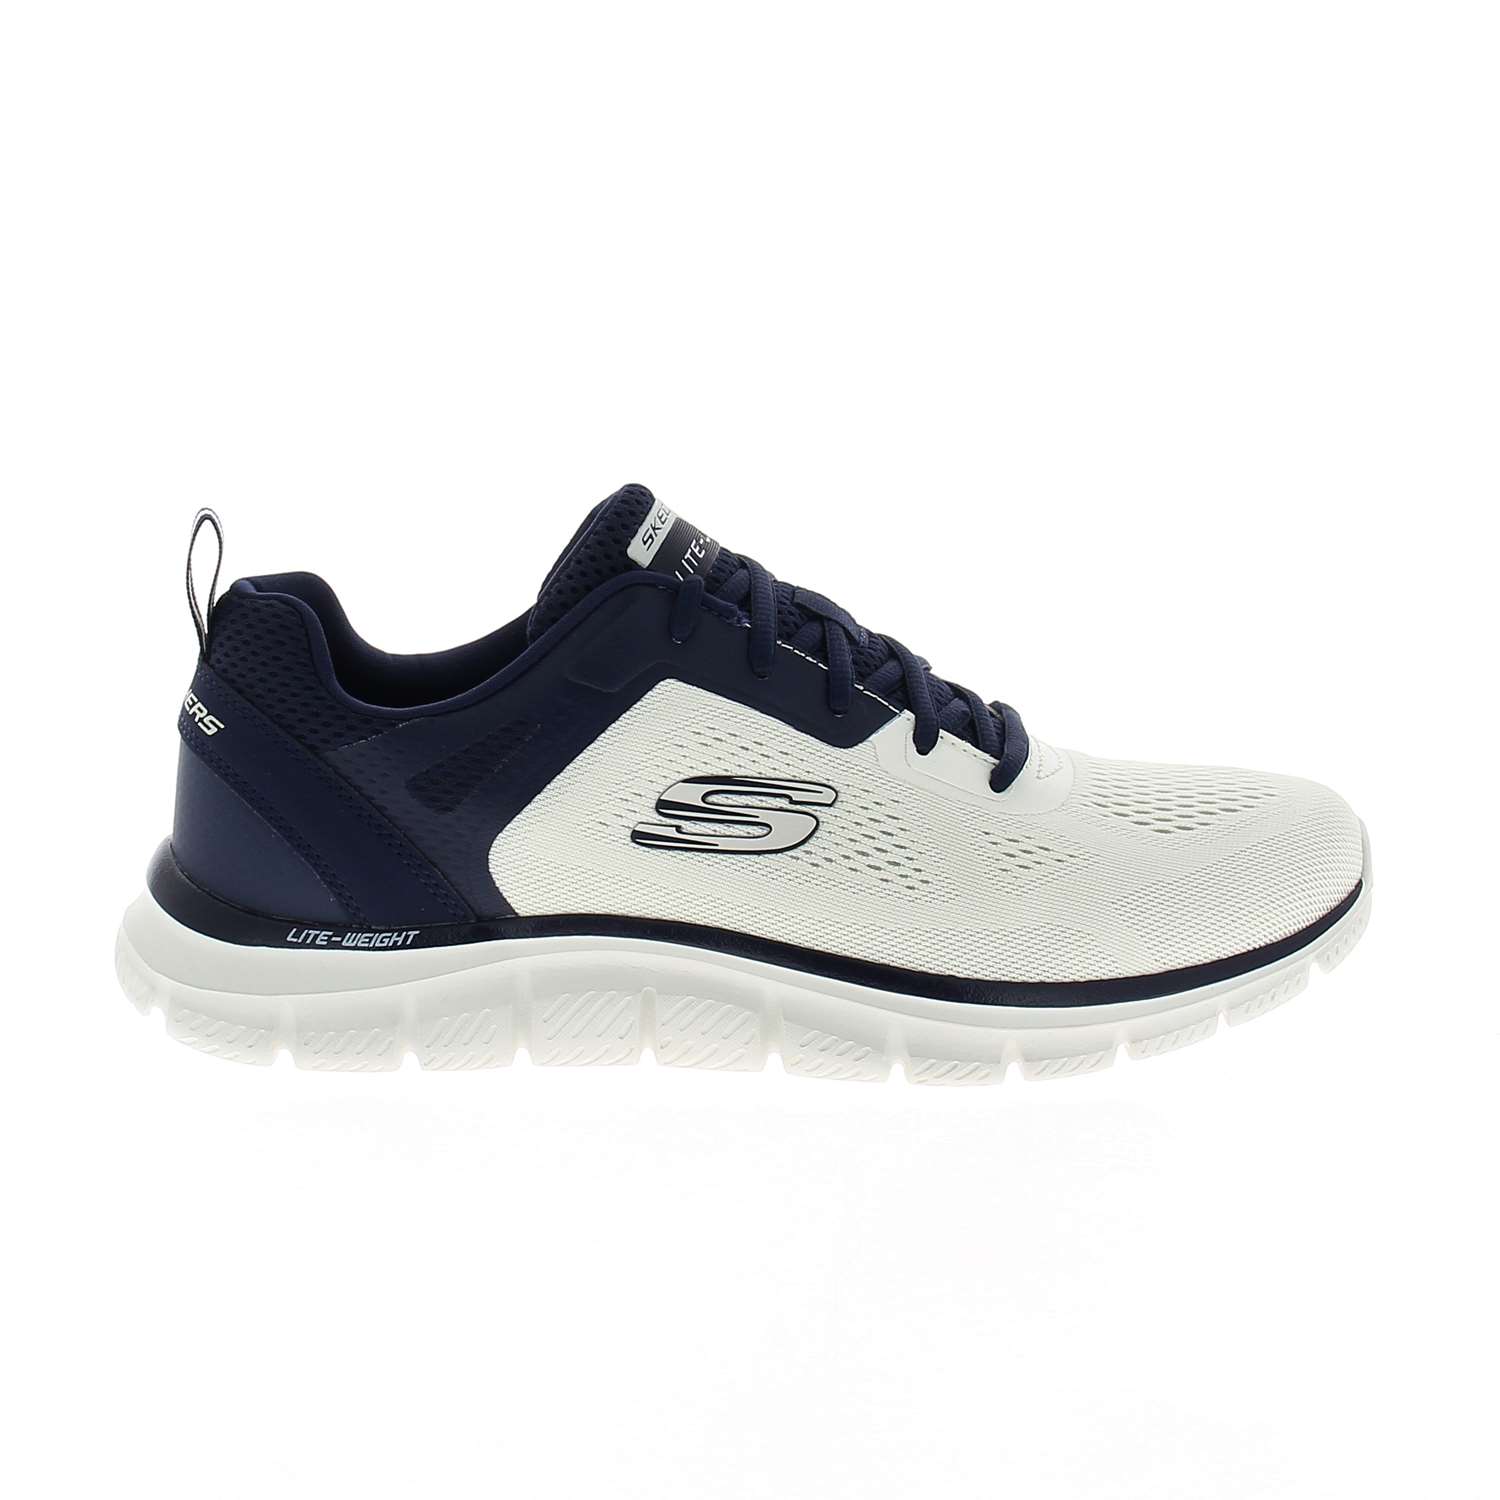 02 - TRACK WB9 - SKECHERS -  - Textile